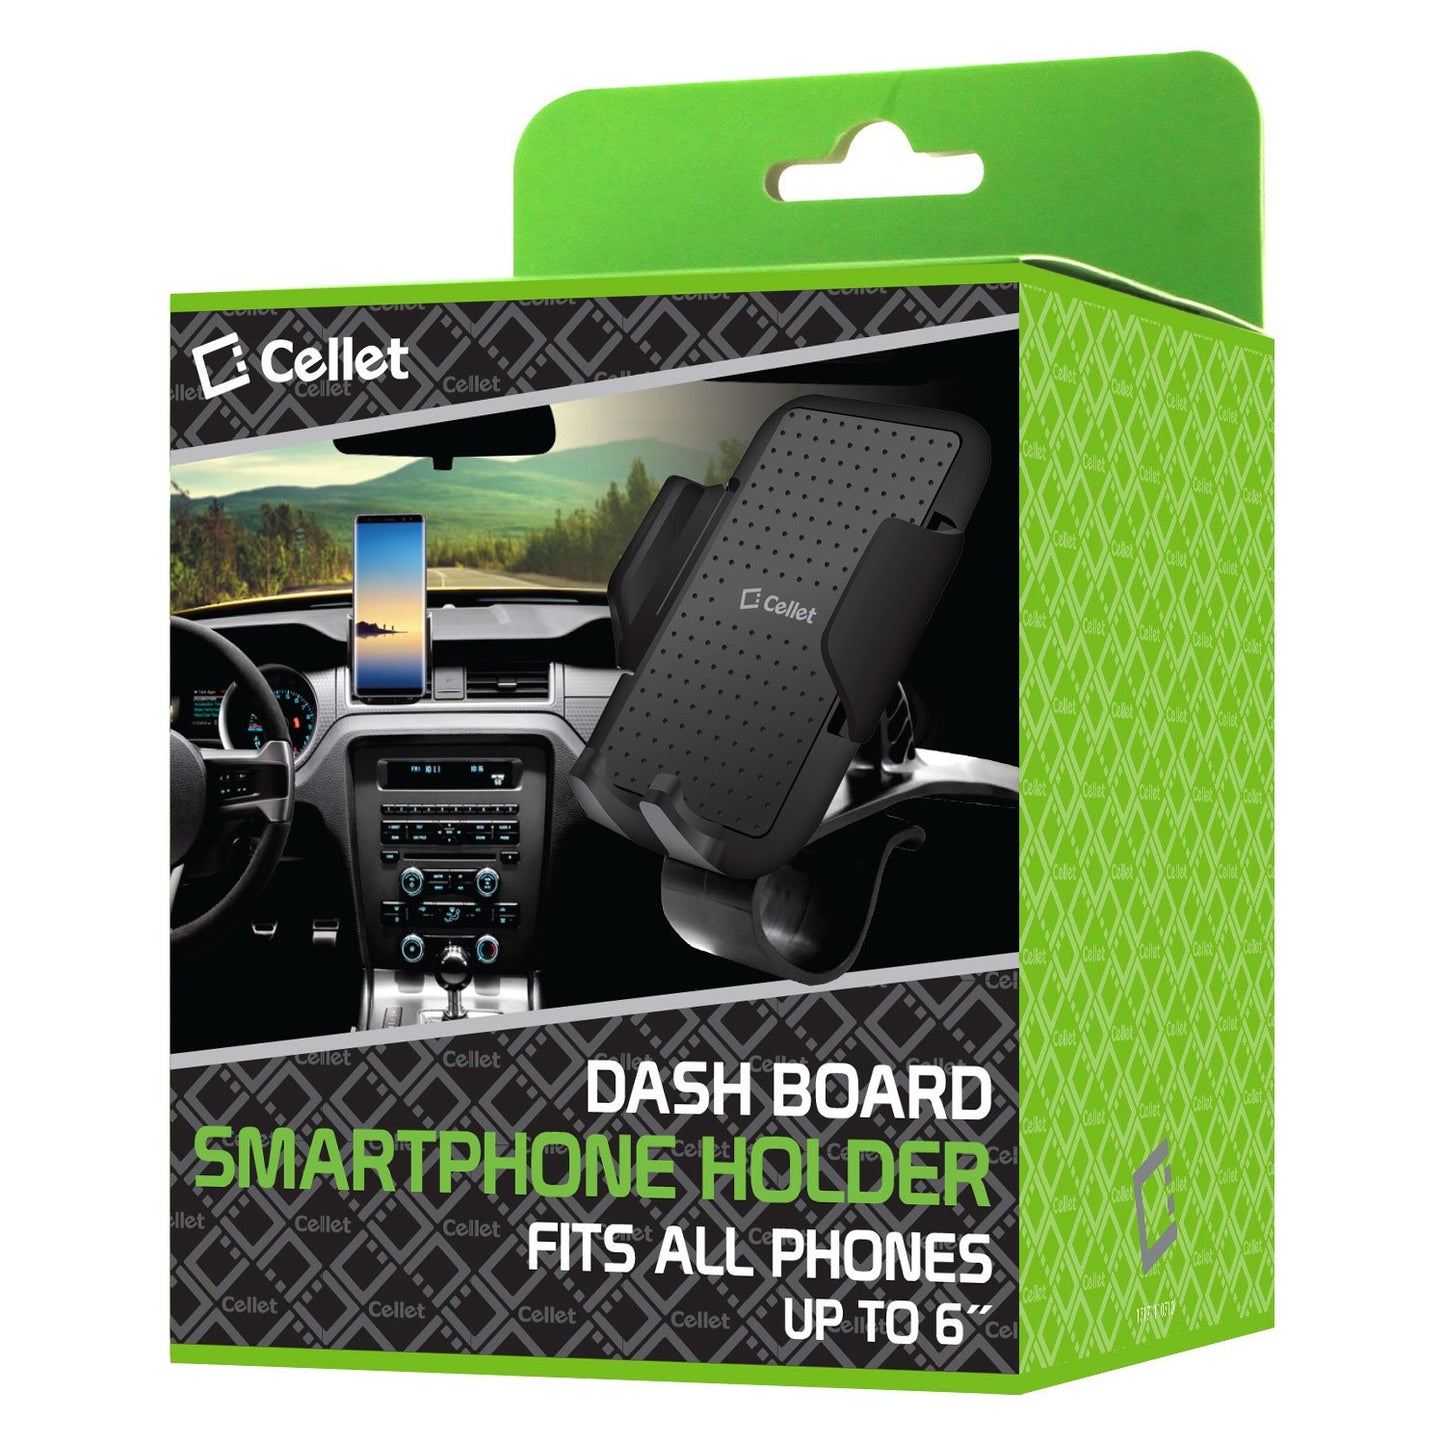 PHD250 -  Cellet Smartphone Holder, Car Phone Mount with 360 Degree Rotation